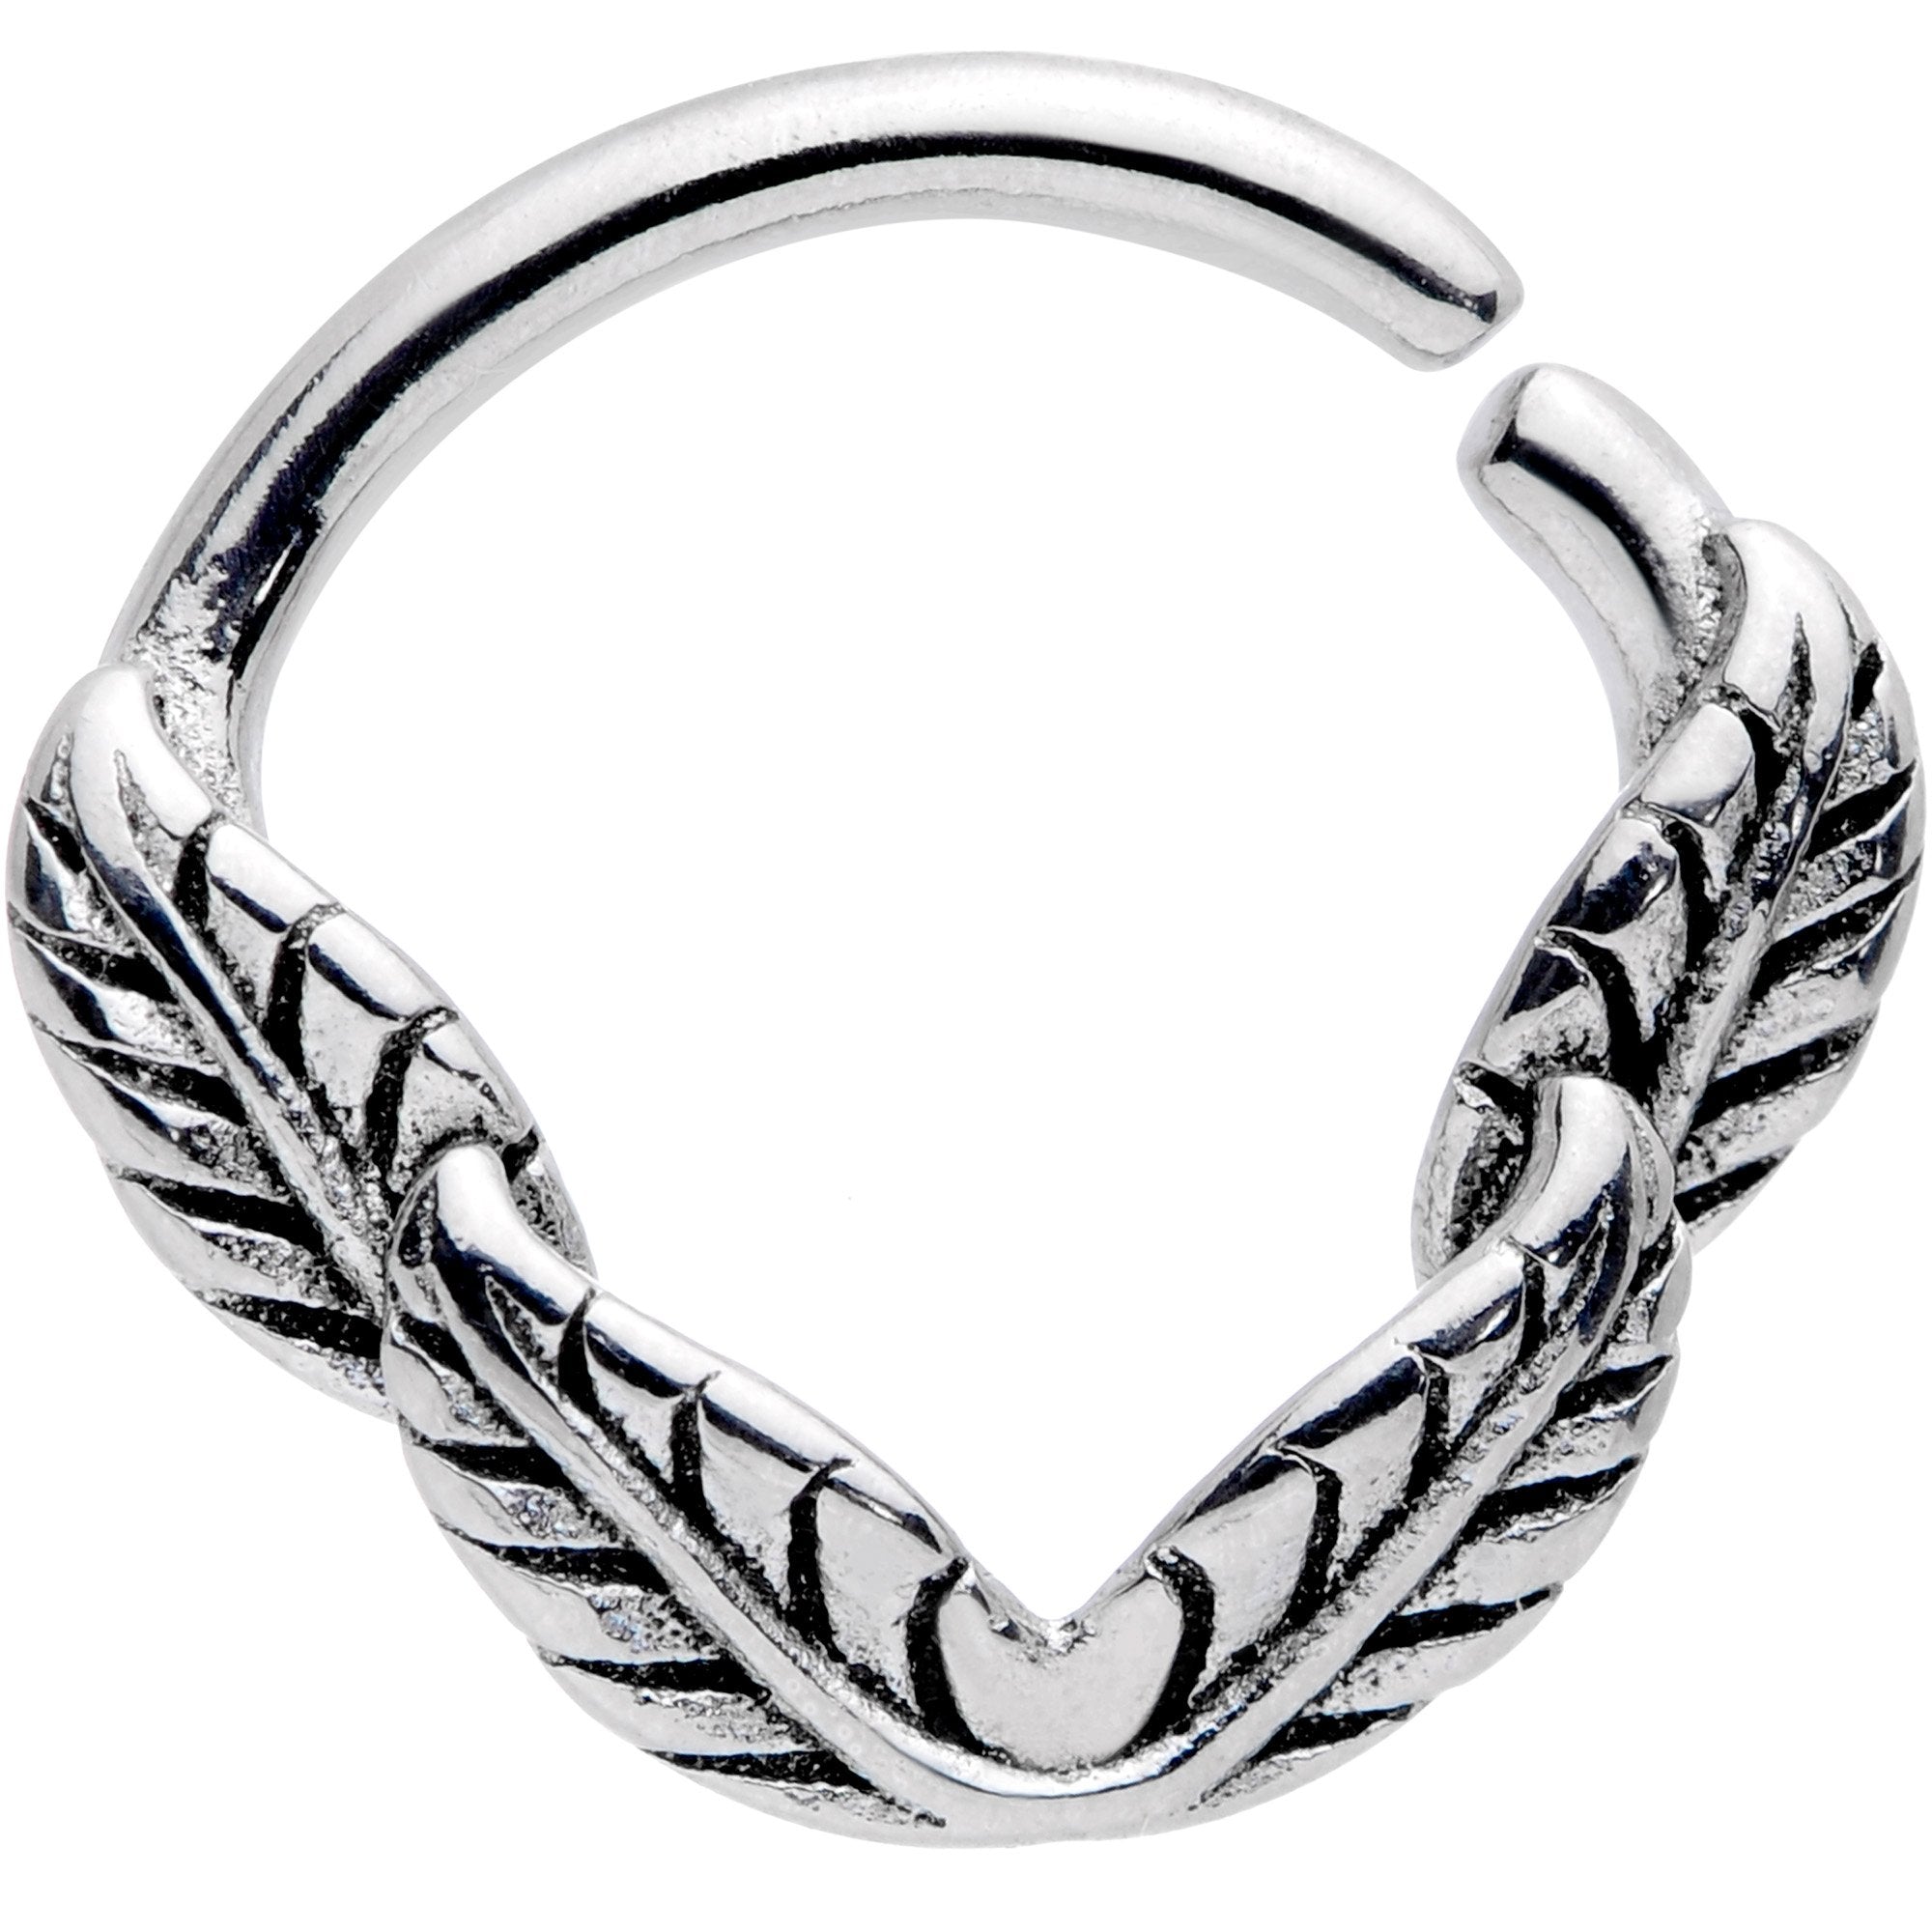 16 Gauge 3/8 Ring of Feathers Closure Ring